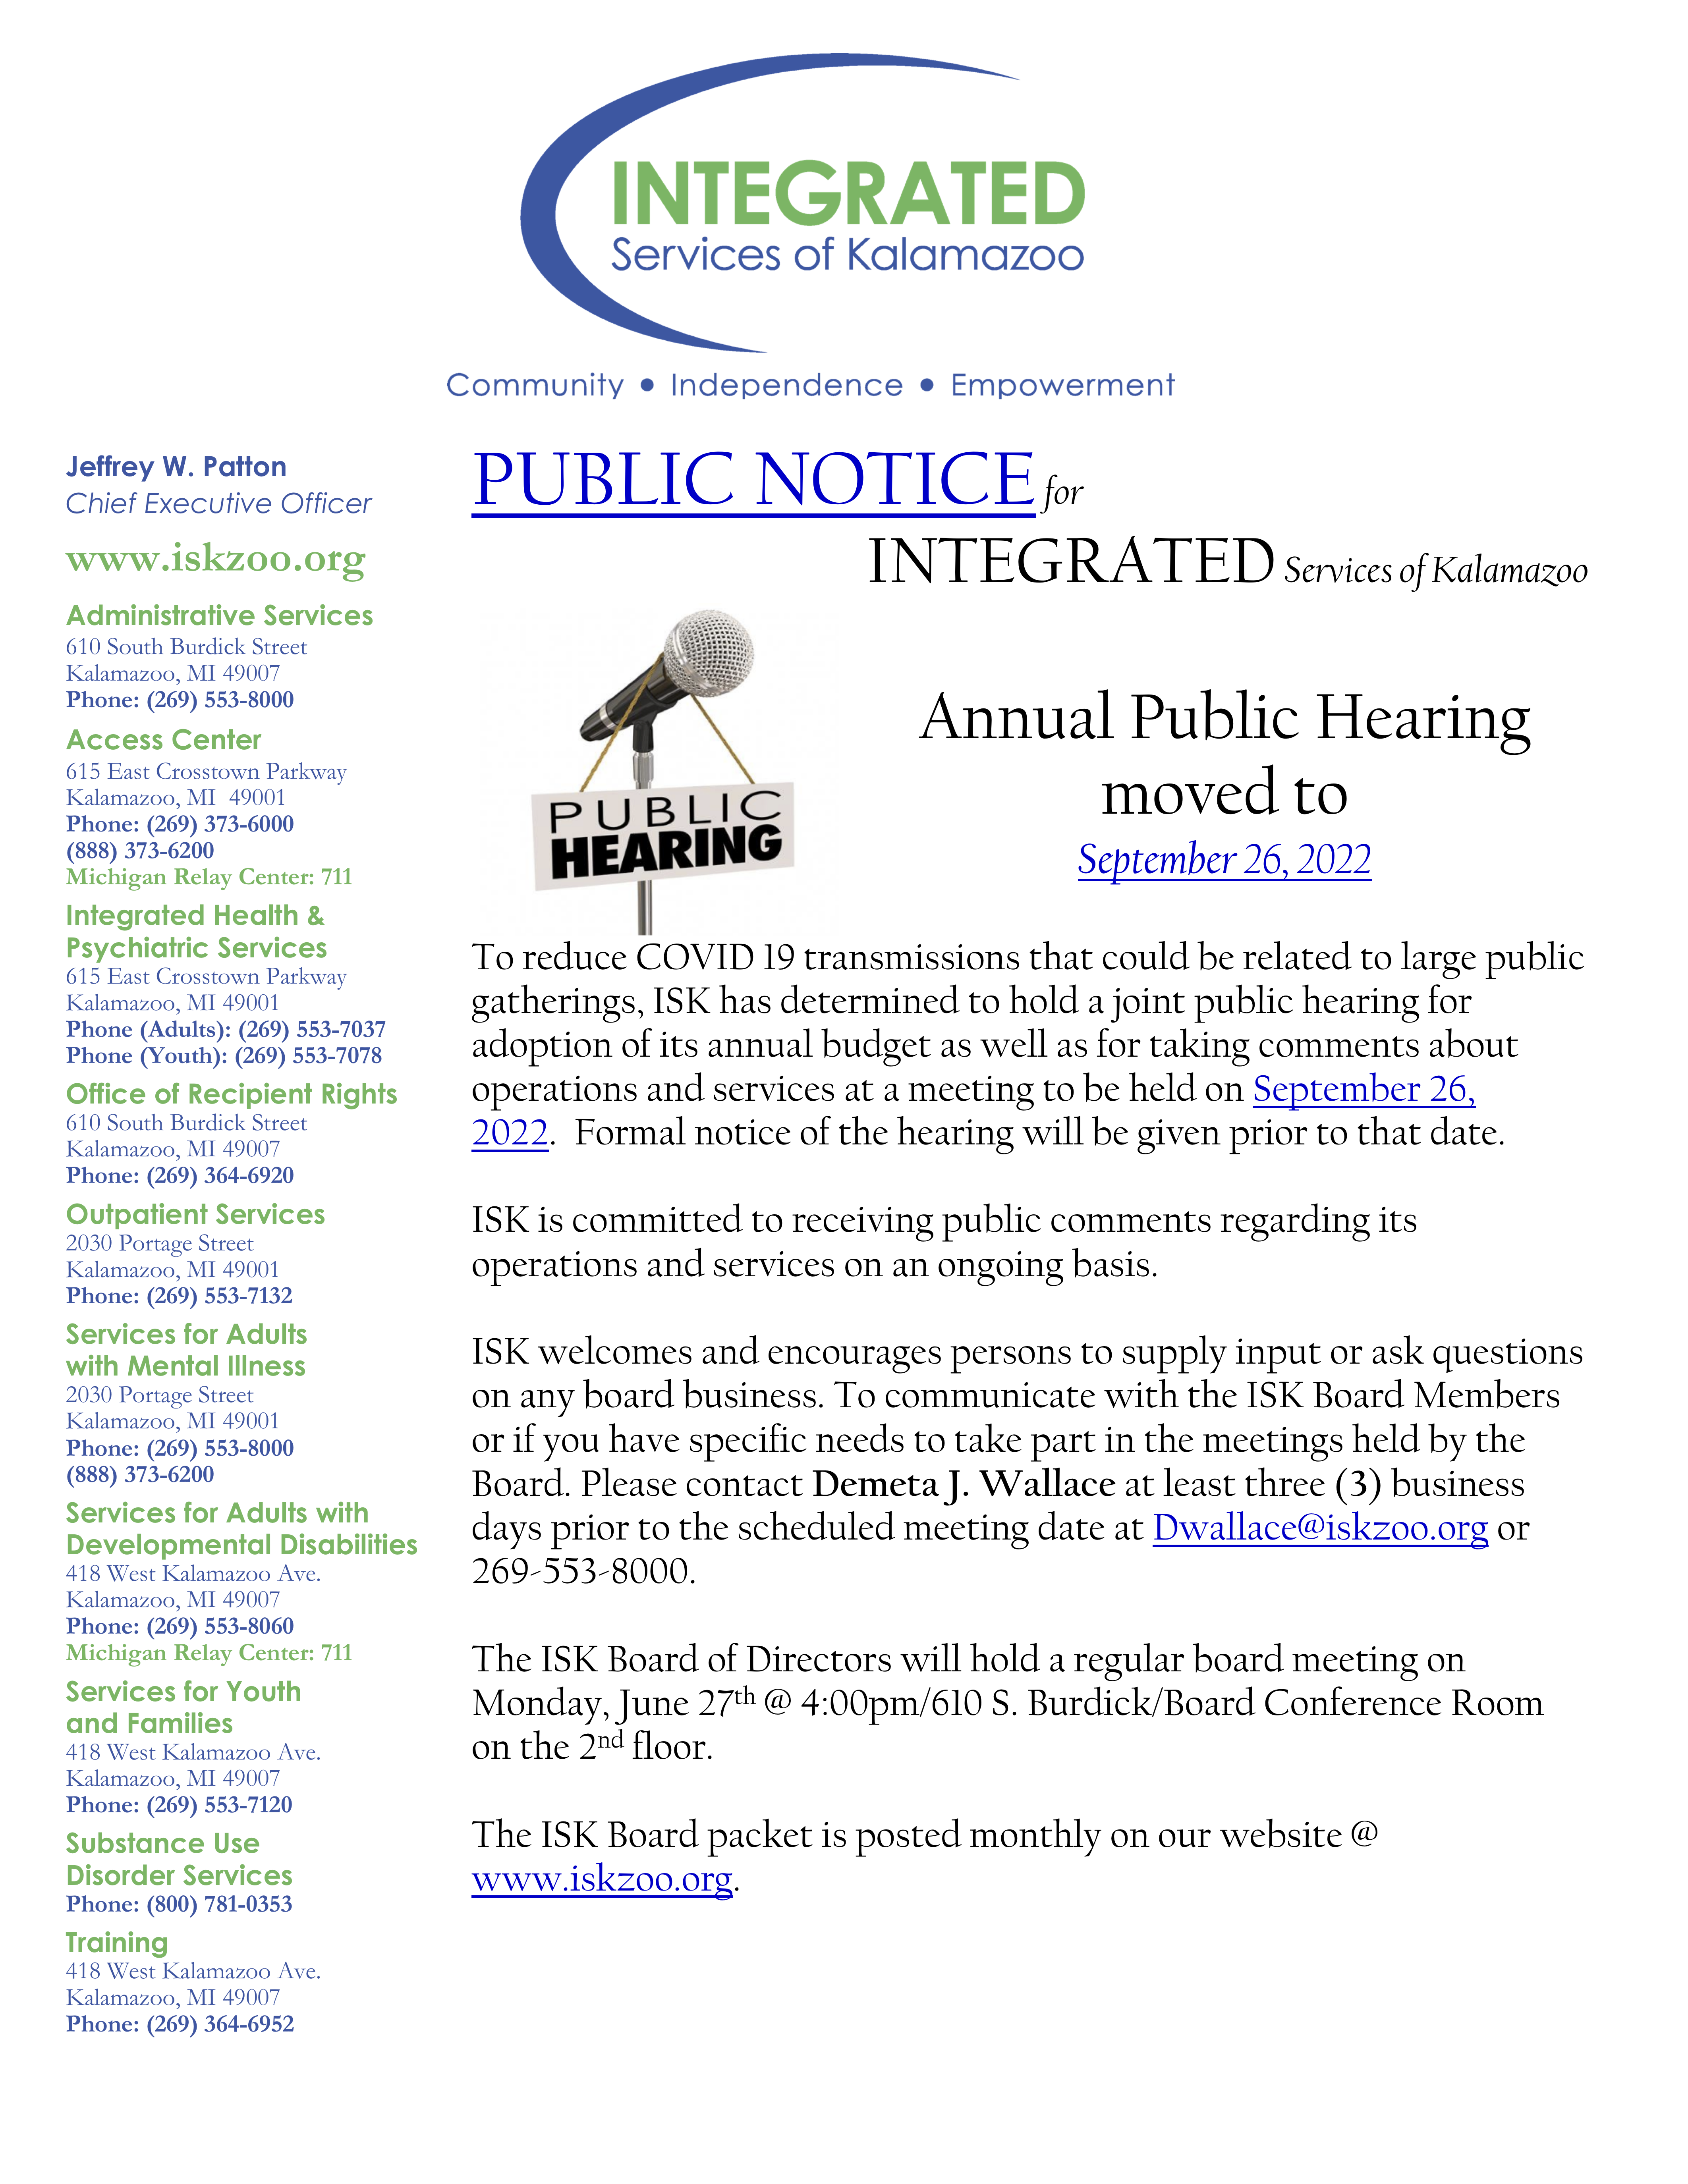 https://iskzoo.org/wp-content/uploads/2022/06/ISK-Board-of-Directors-PUBLIC-NOTICE-CANCELLATION-of-the-Annual-Public-Hearing-June-2022-1.png